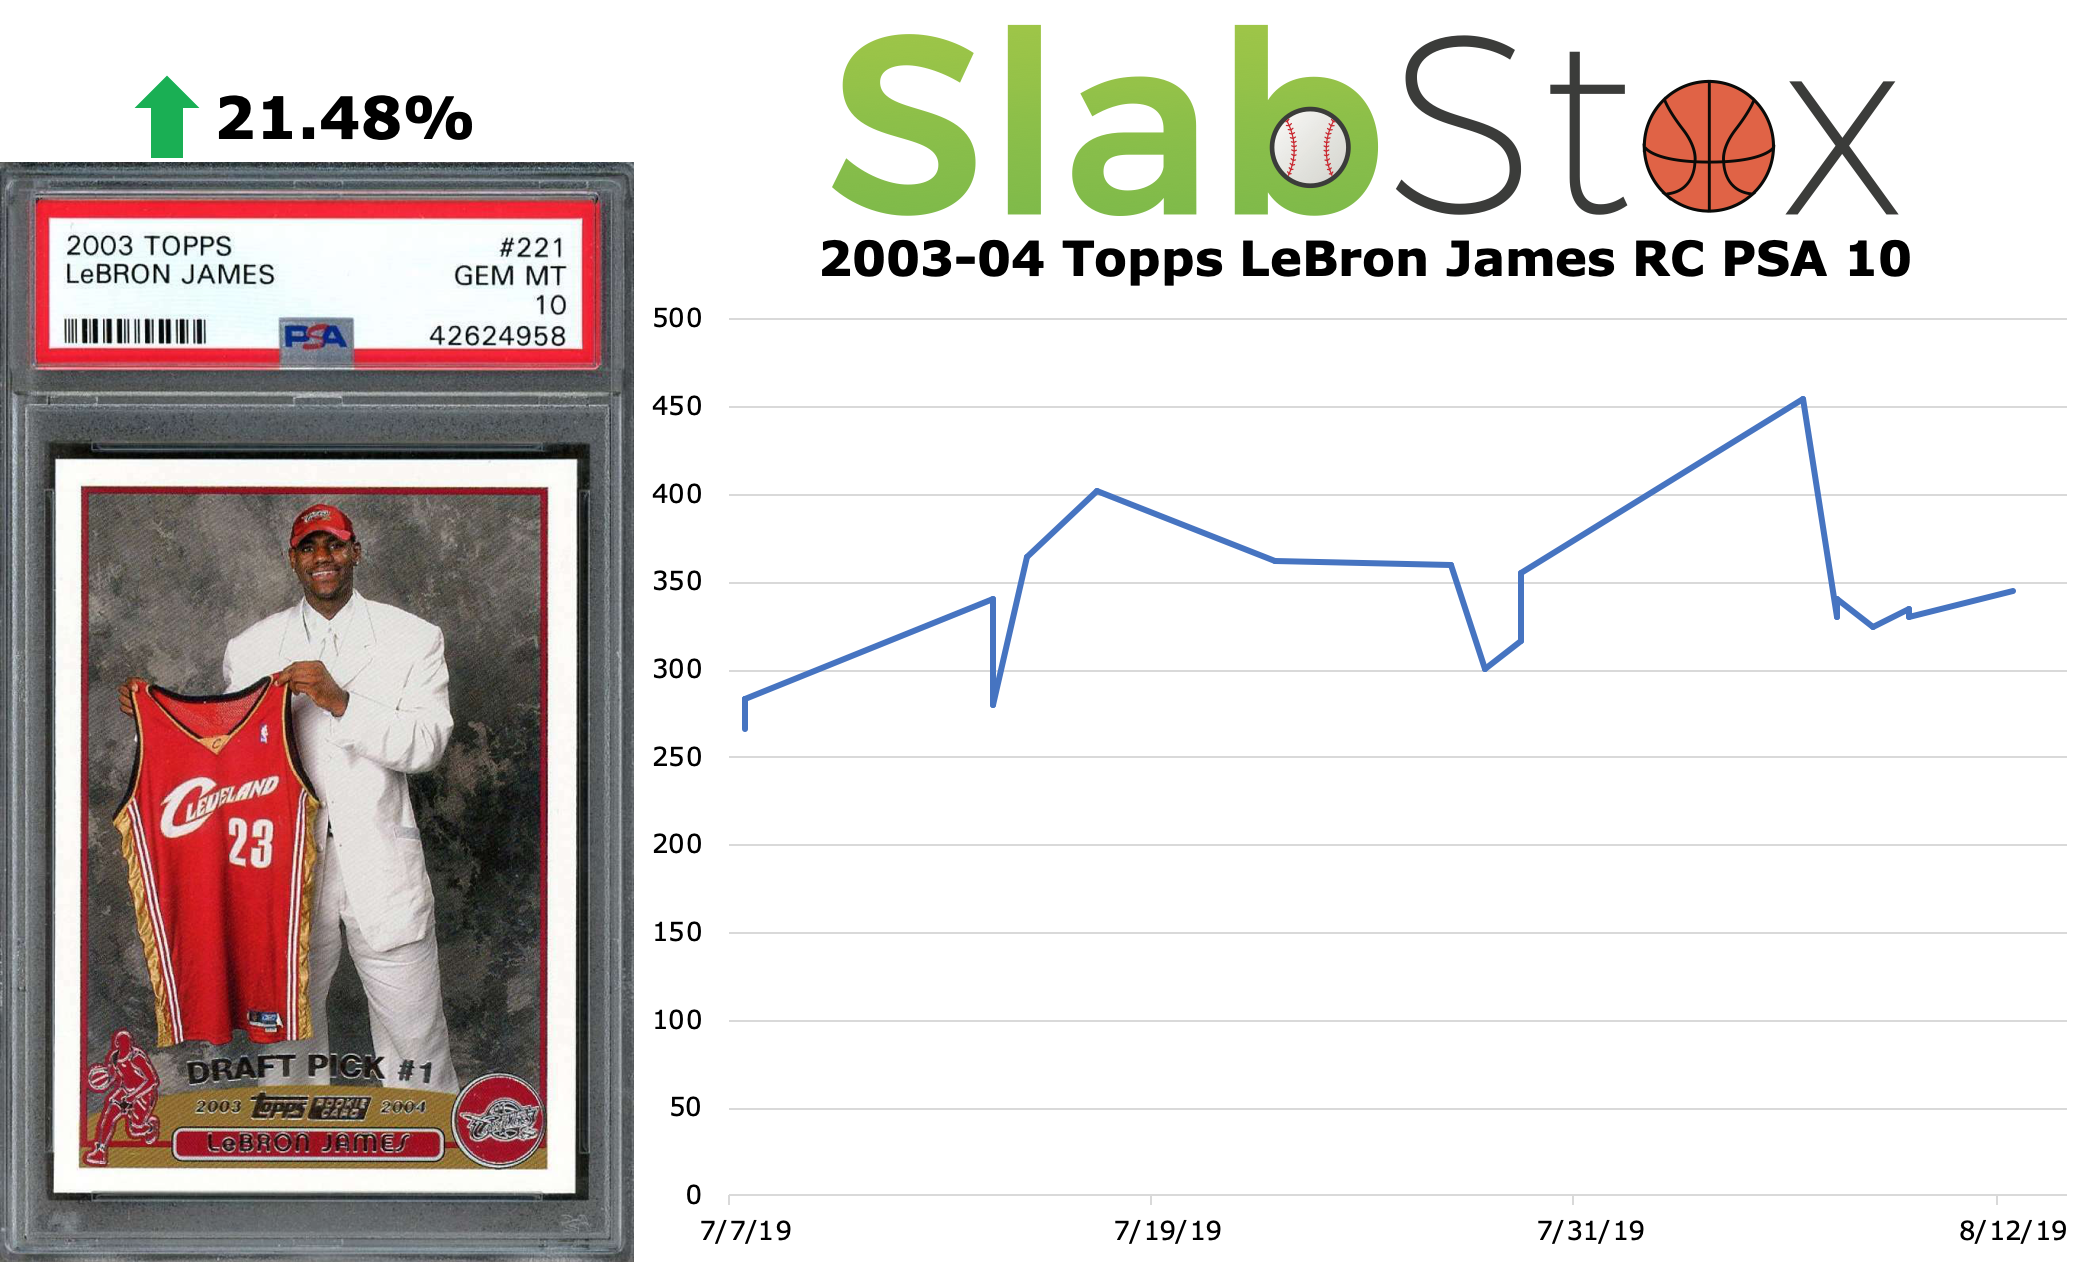 SlabStox infographic 2003-04 Topps LeBron James RC PSA 10 sports trading card